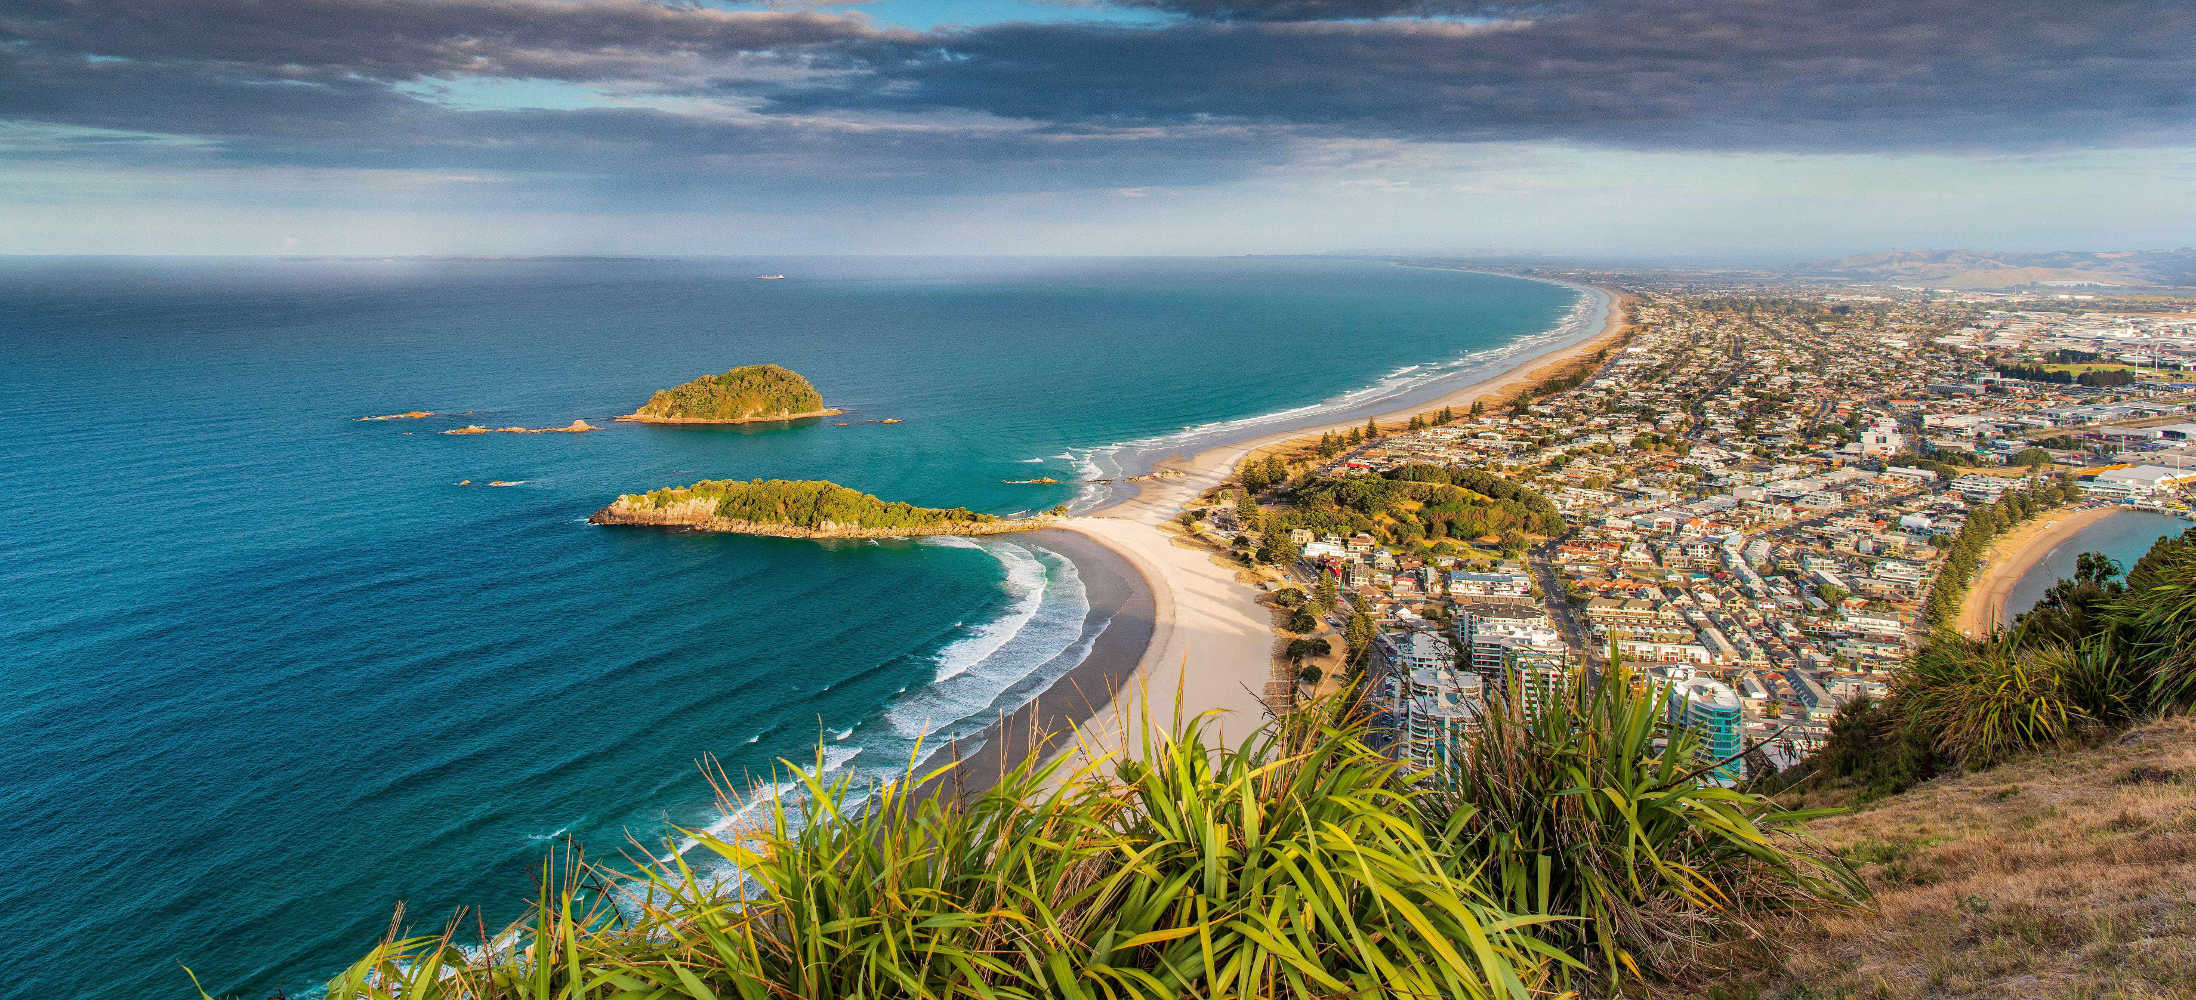 Pilot Bay Beach, a view of Taurunga from the Summit of Mount Maunganui, New Zealand